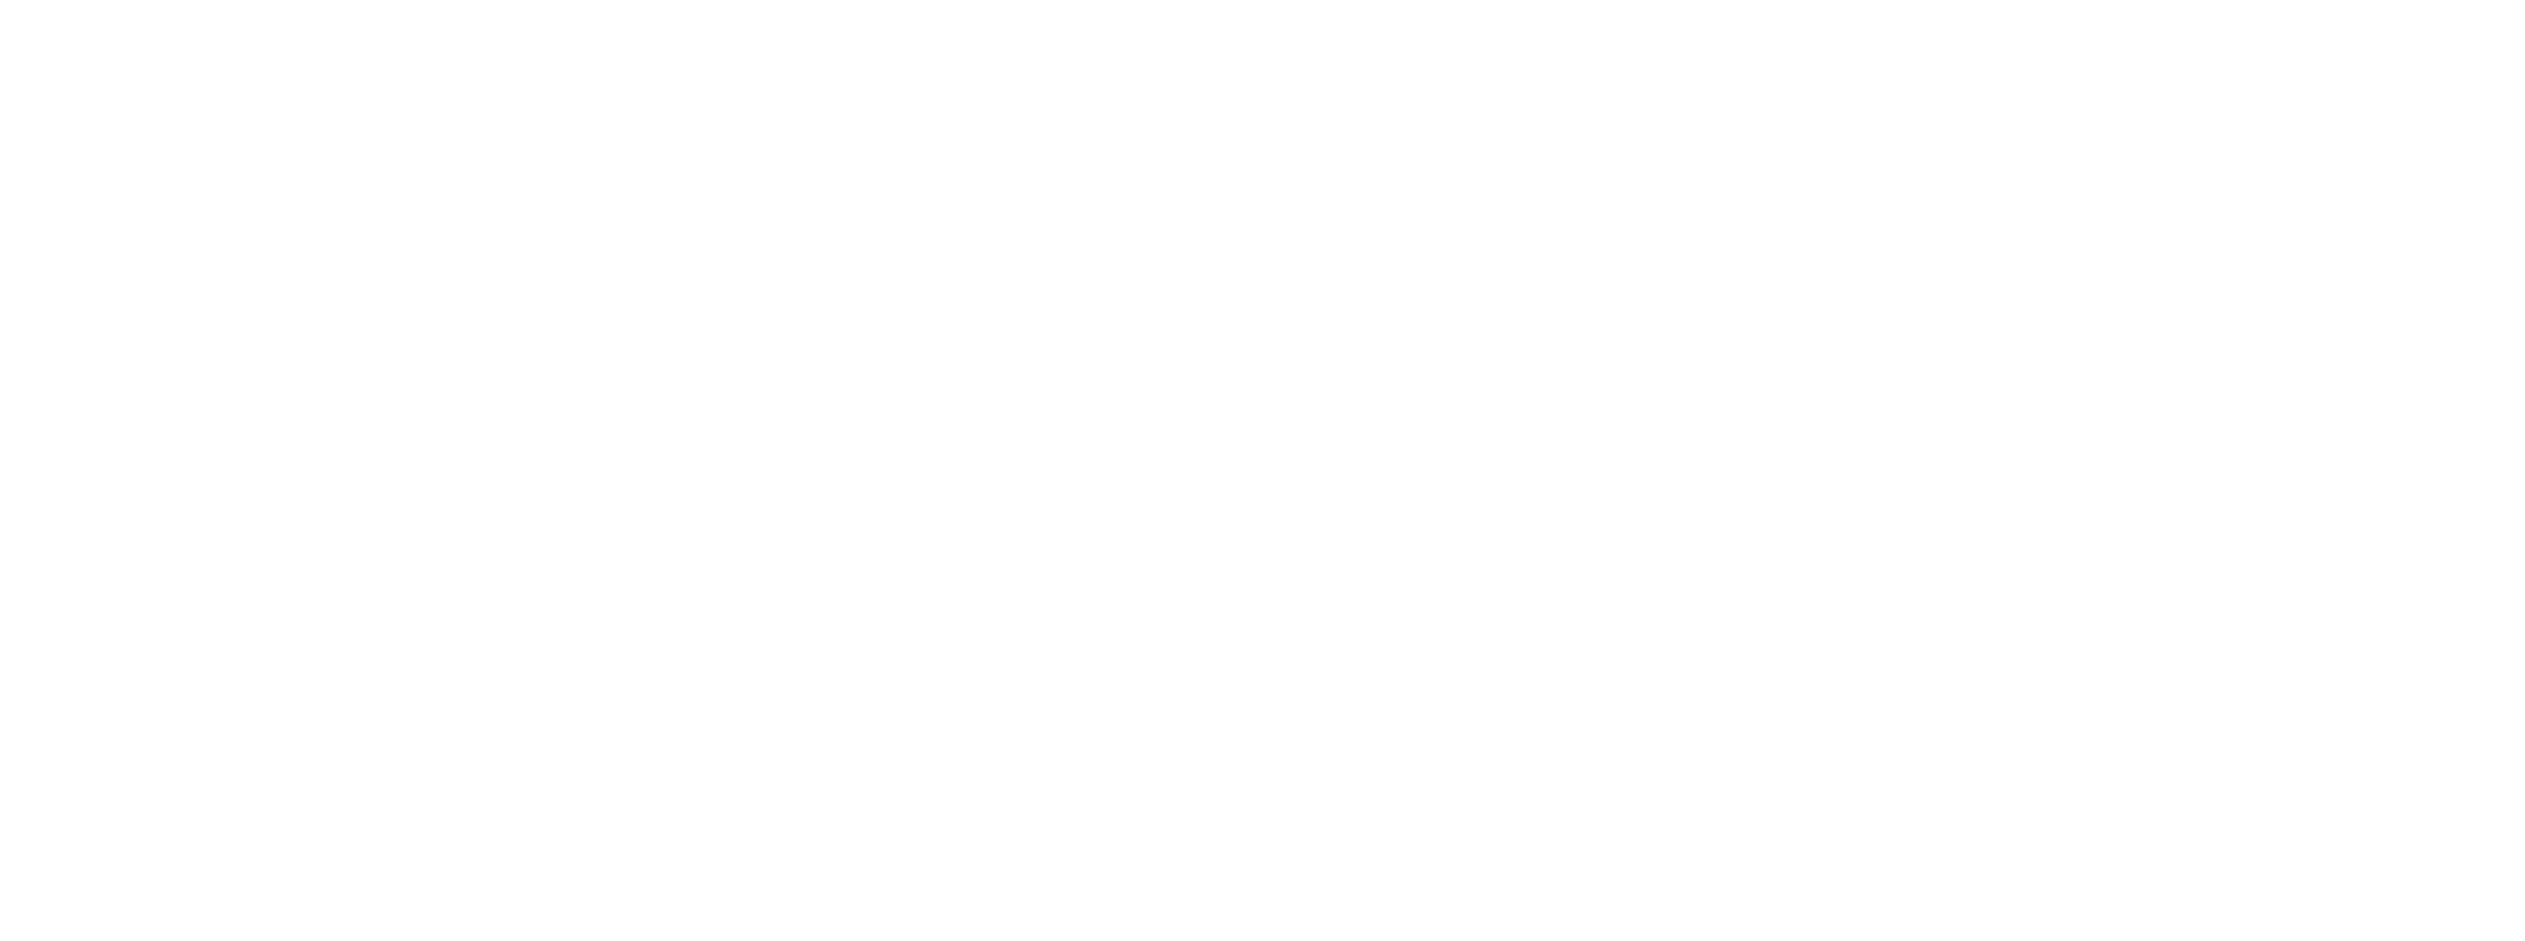 Brookfield Institute for Innovation and Entrepreneurship